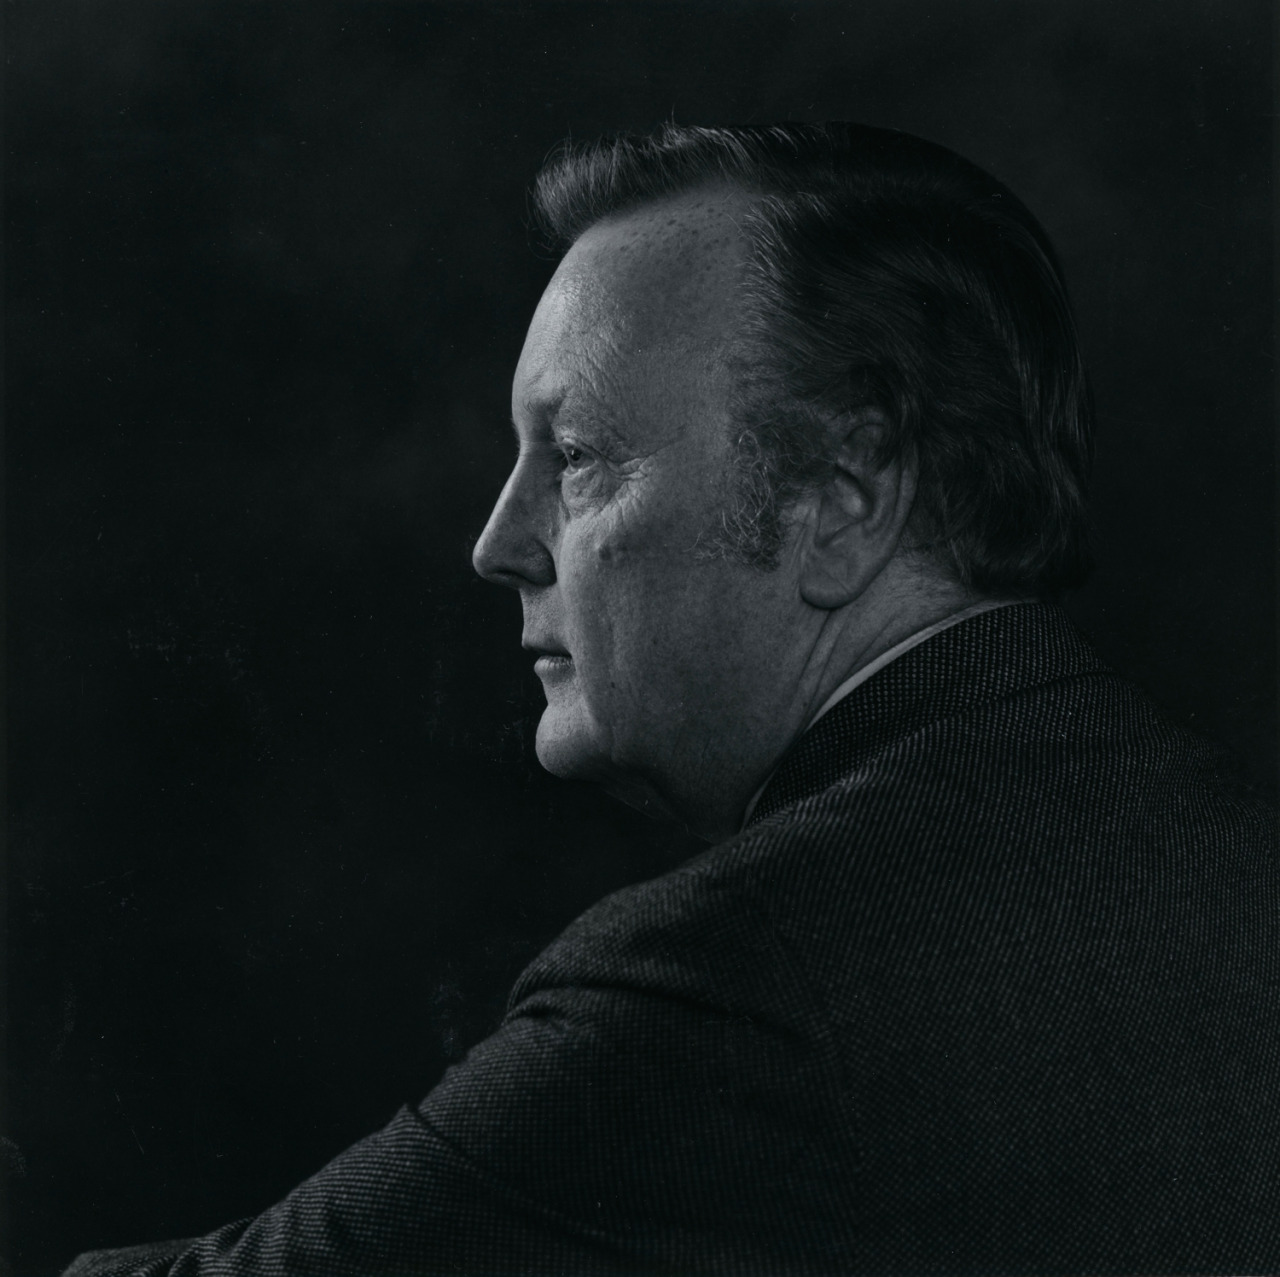 This is my grandfather, Lewis Louthood. Former Publisher of the Montreal Star & Weekend Magazine. The photo was taken by Yousuf Karsh, one of my all time favourite photographers.
I have no idea why Karsh did a portrait of my grandfather. My mother...